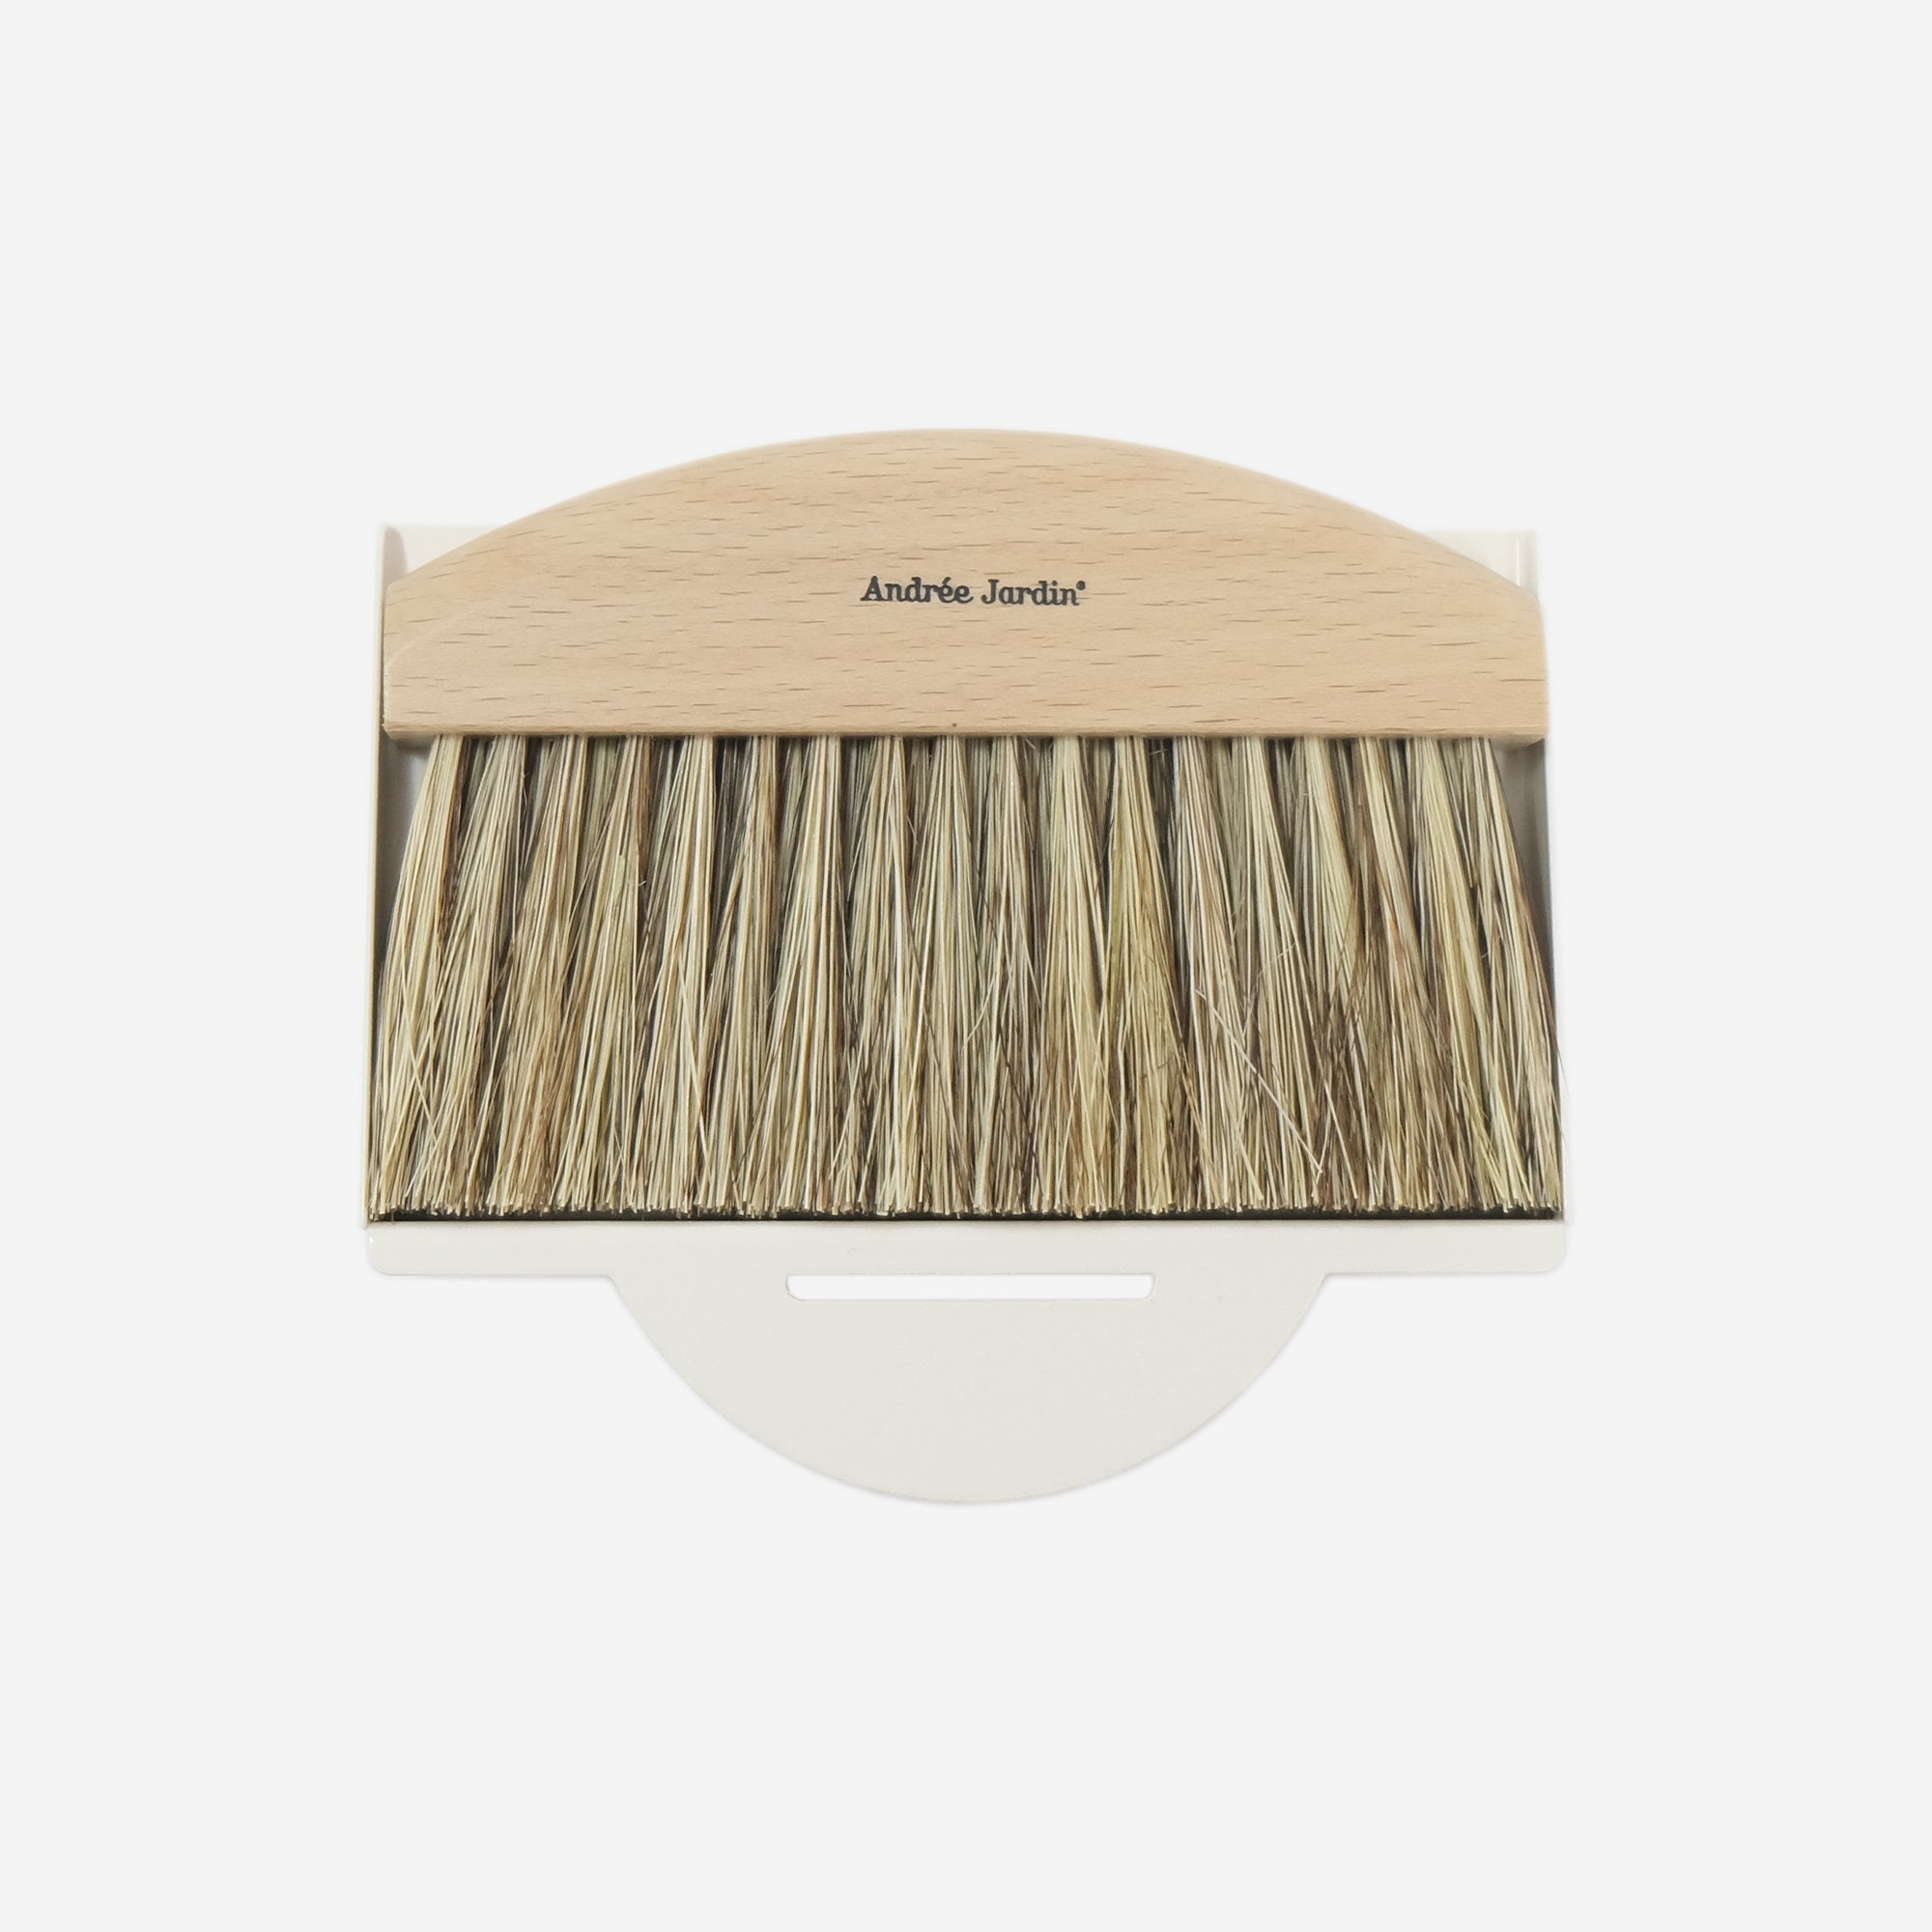 Andrée Jardin French Essential Dish Brush Set, Includes 5 Brushes